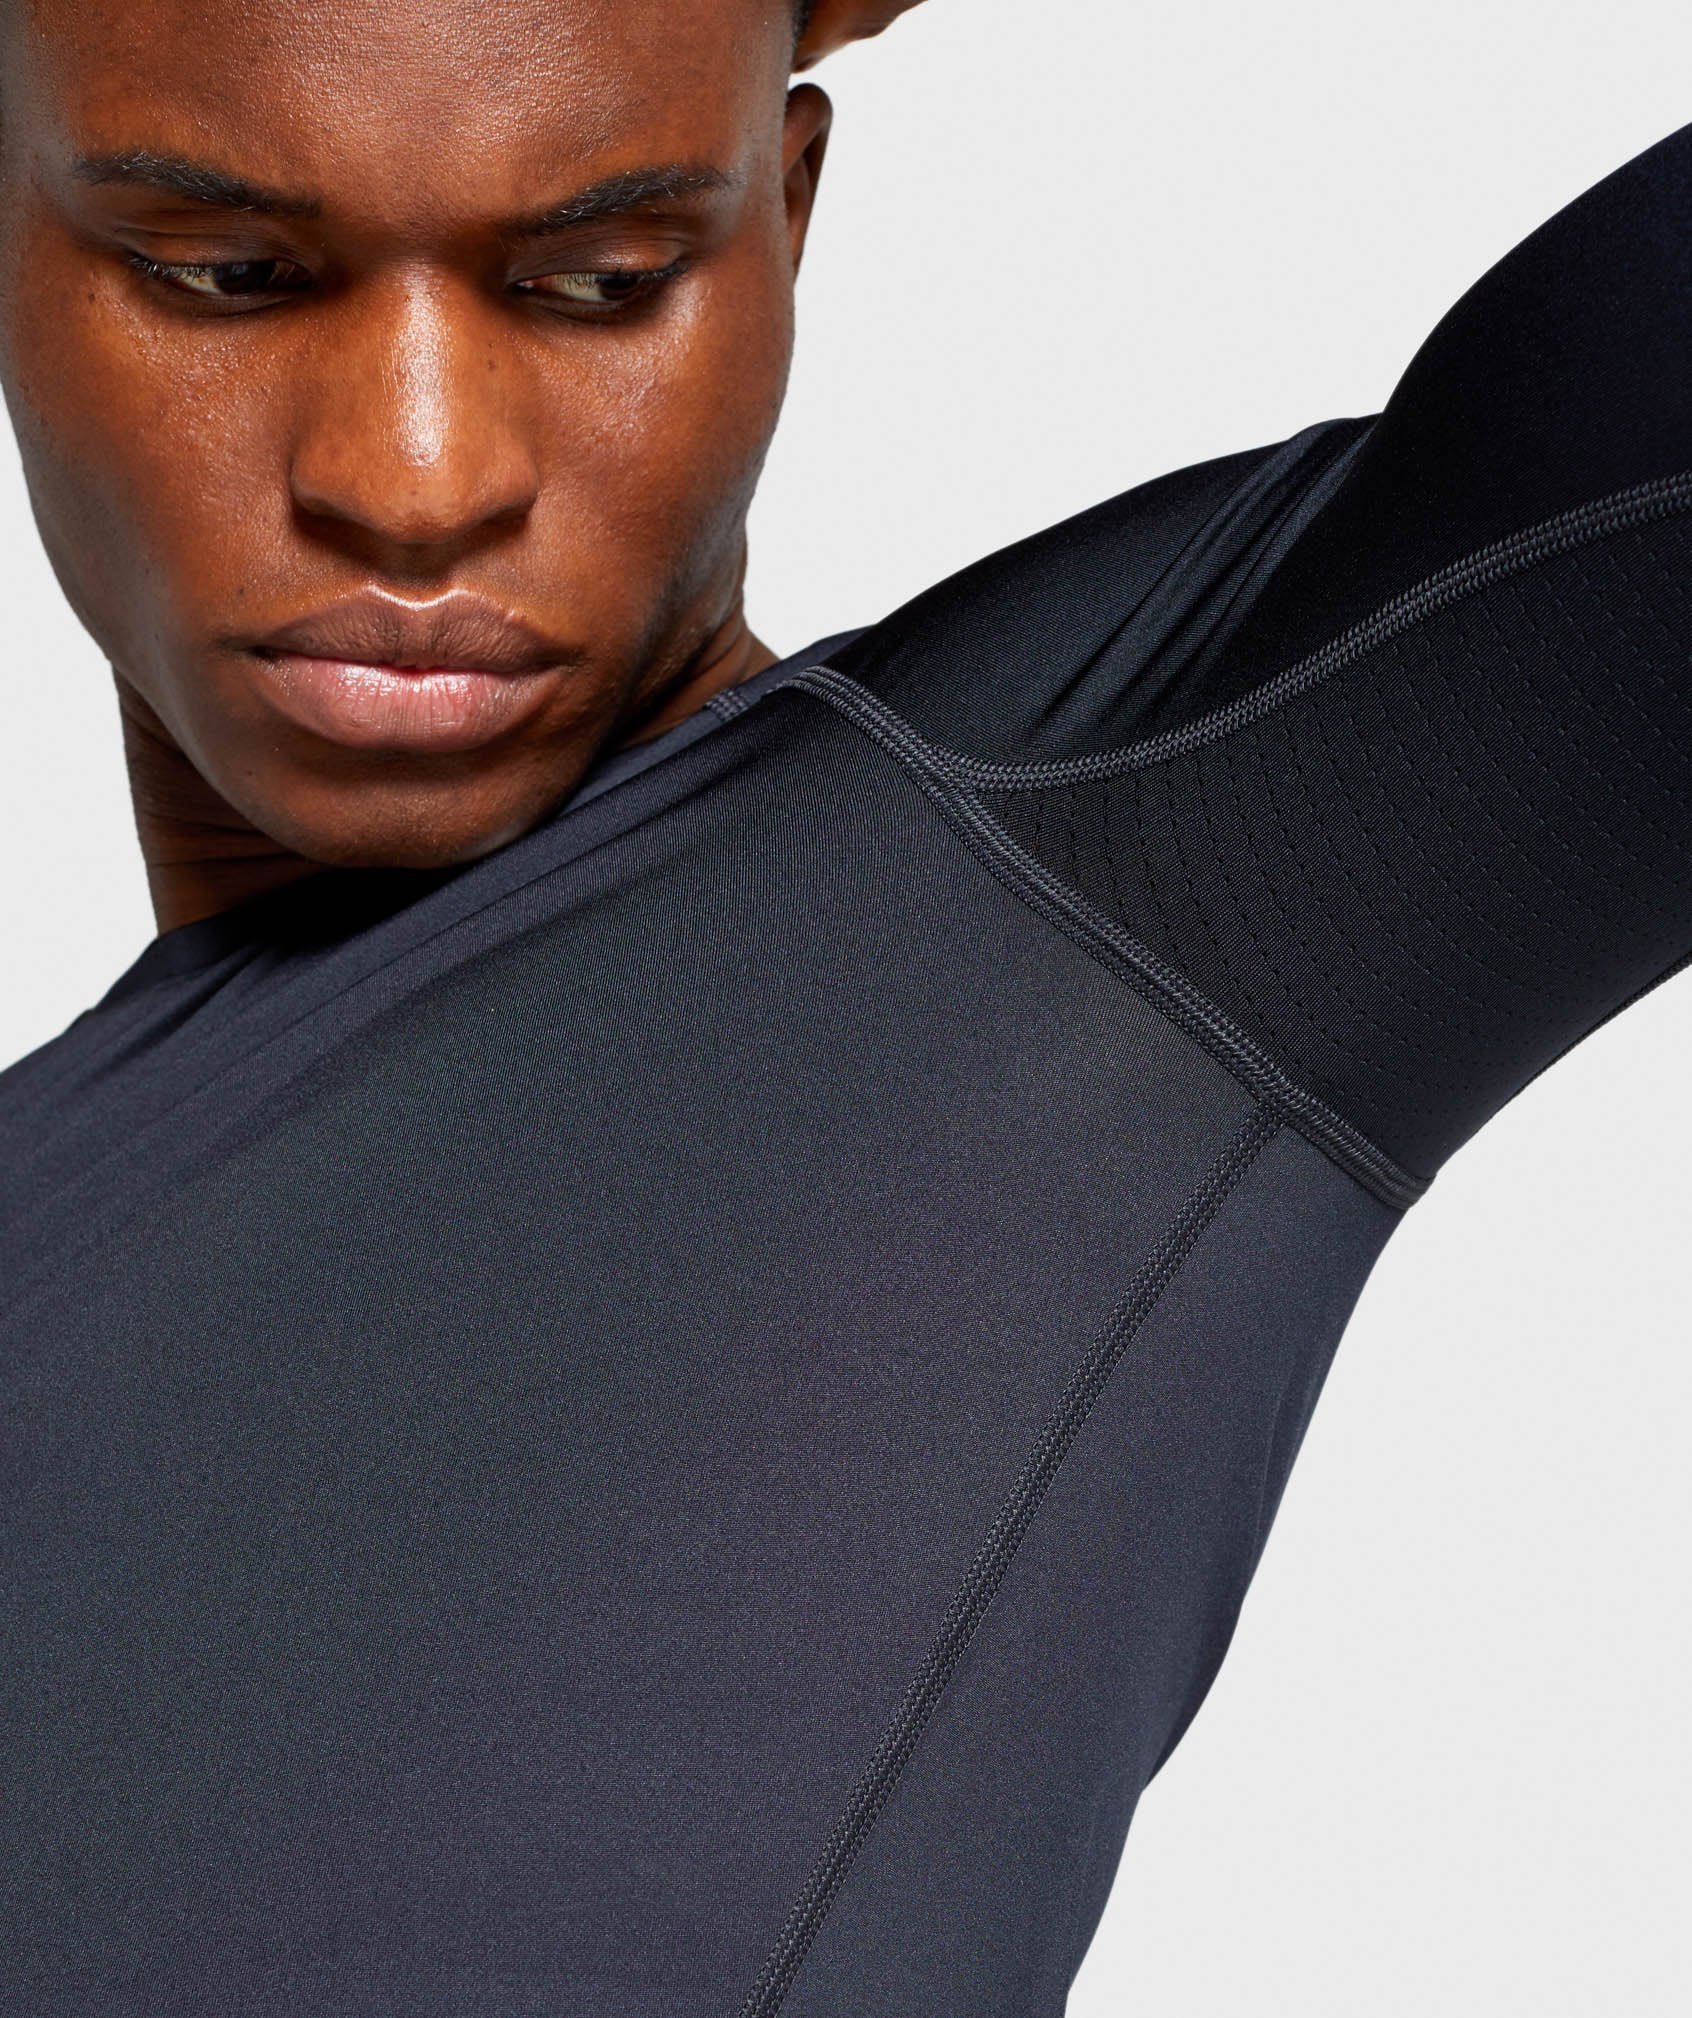 Element Baselayer Long Sleeve T-Shirt in Black - view 4